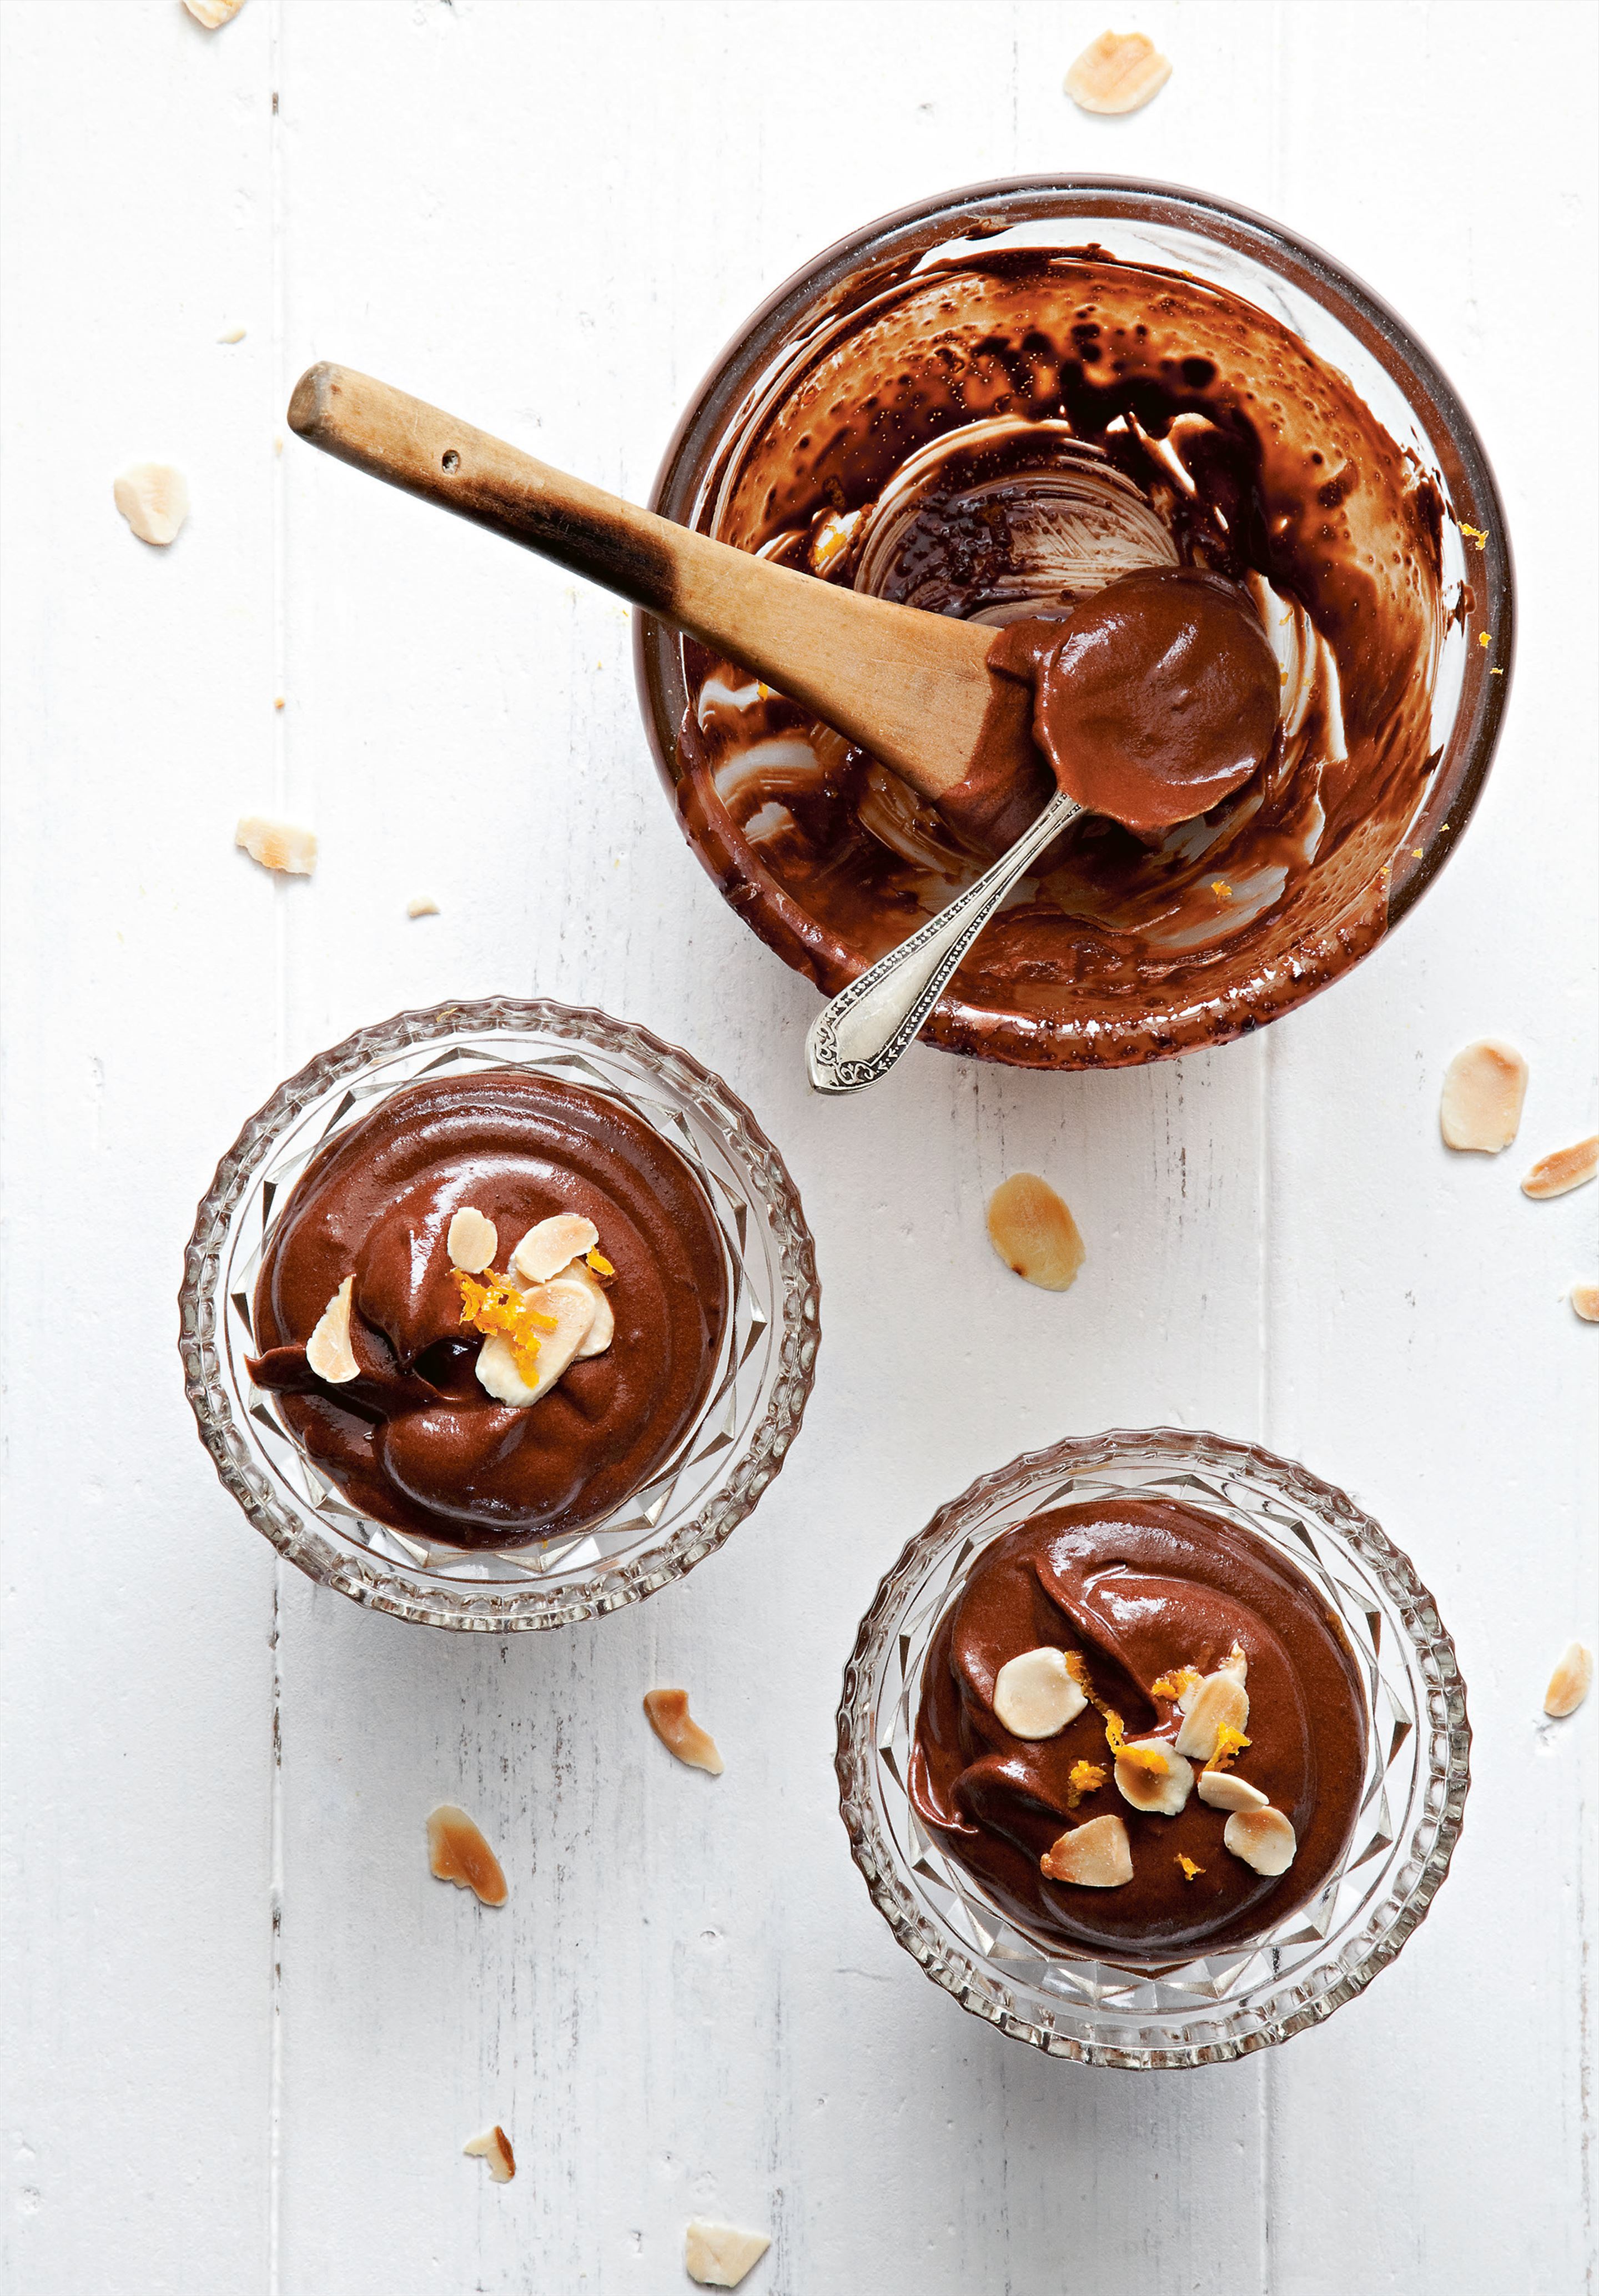 Olive oil chocolate mousse